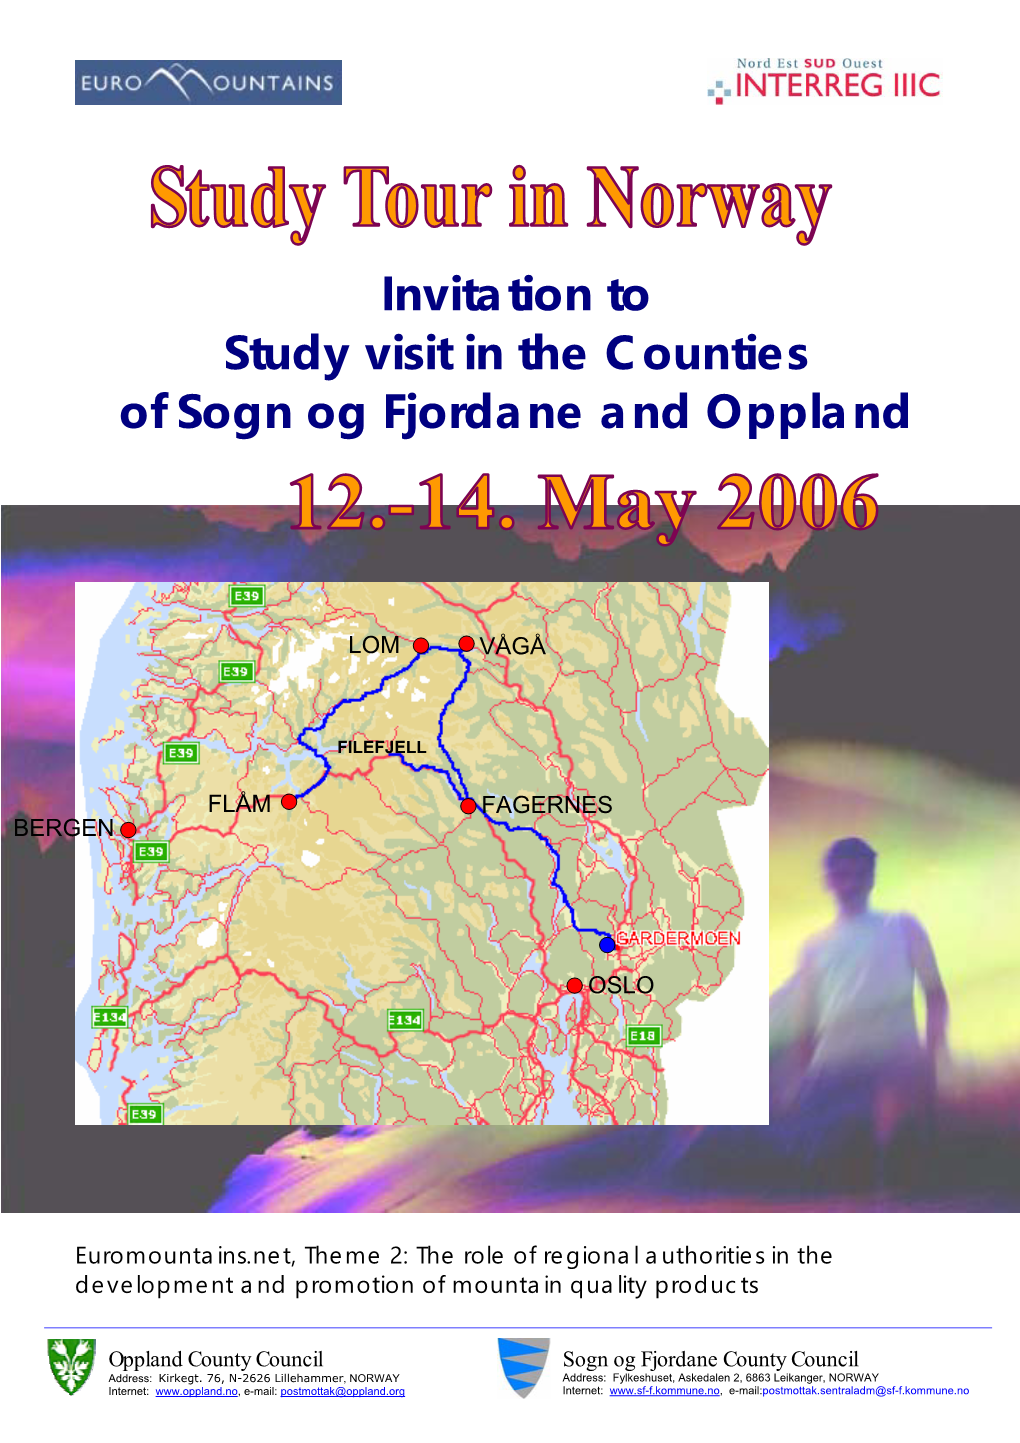 Invitation to Study Visit in the Counties of Sogn Og Fjordane and Oppland